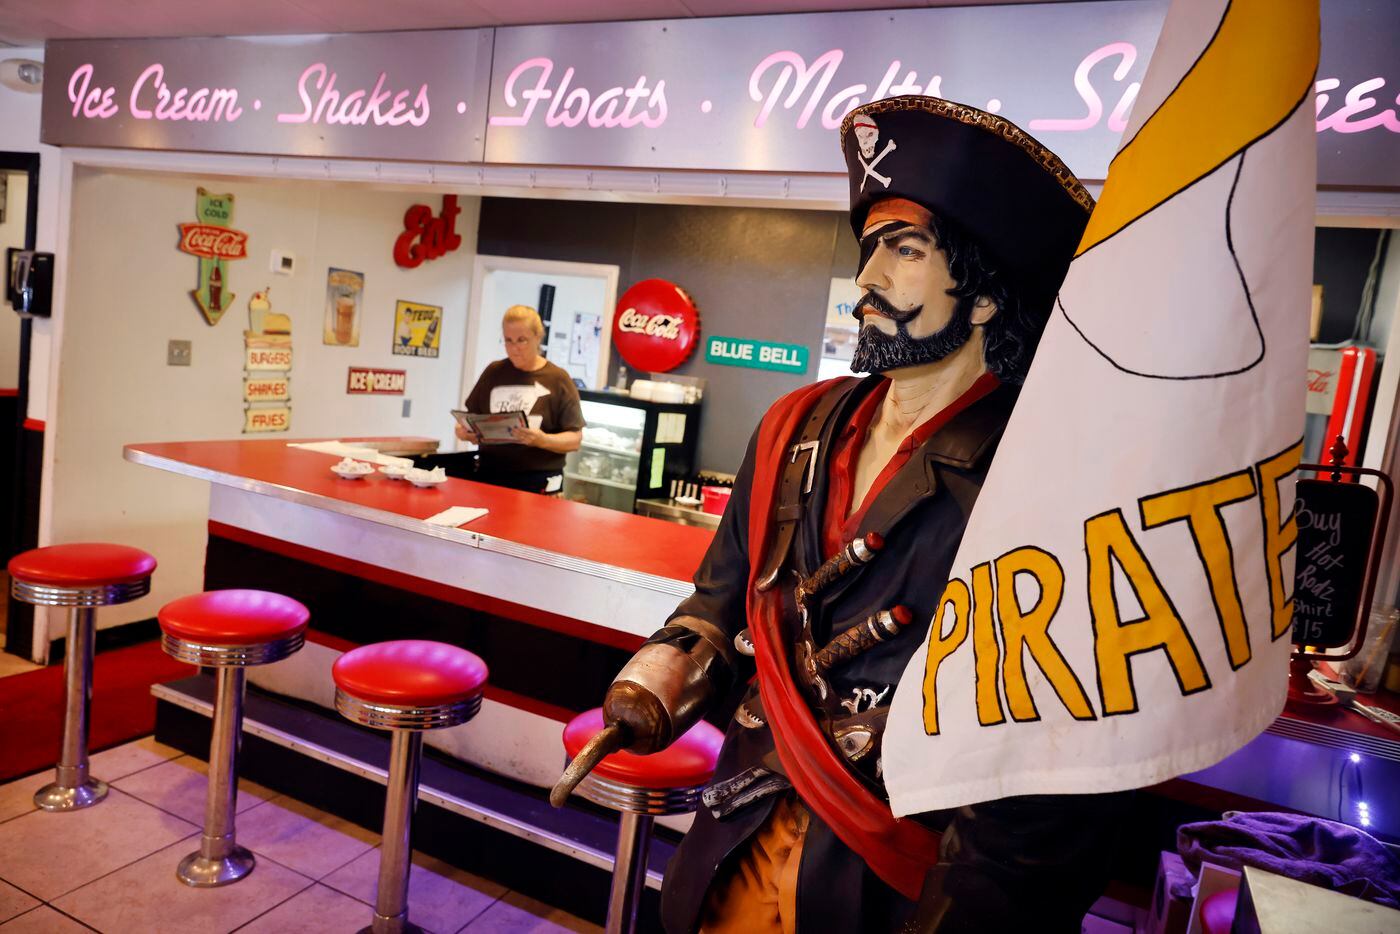 A life-size Crandall High pirate mascot stands ready for selfie photos inside the Hot Rodz...